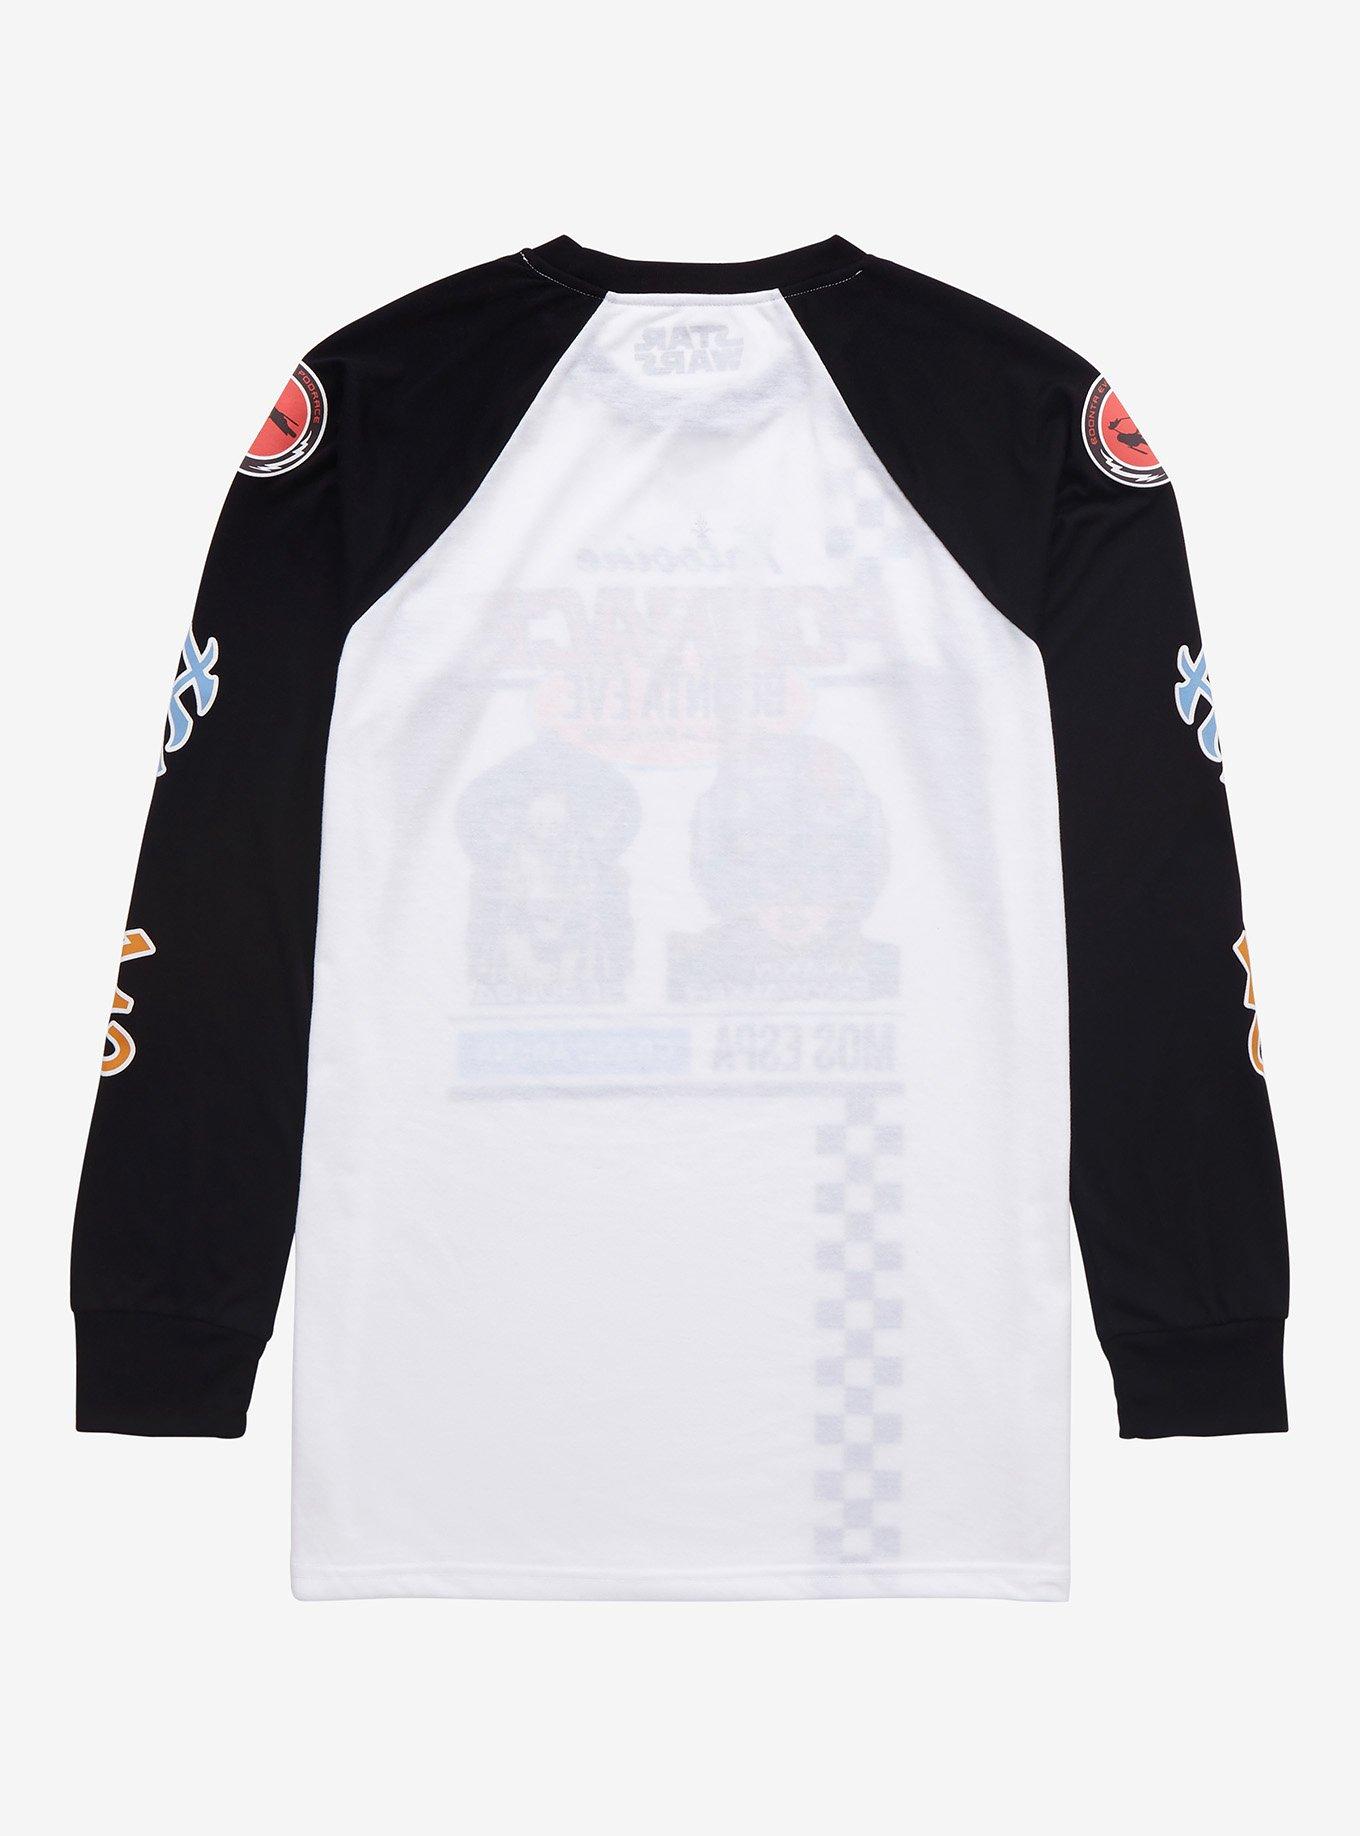 Our Universe Star Wars Tatooine Podracing Long Sleeve T-Shirt - BoxLunch Exclusive, BLACK  WHITE, alternate